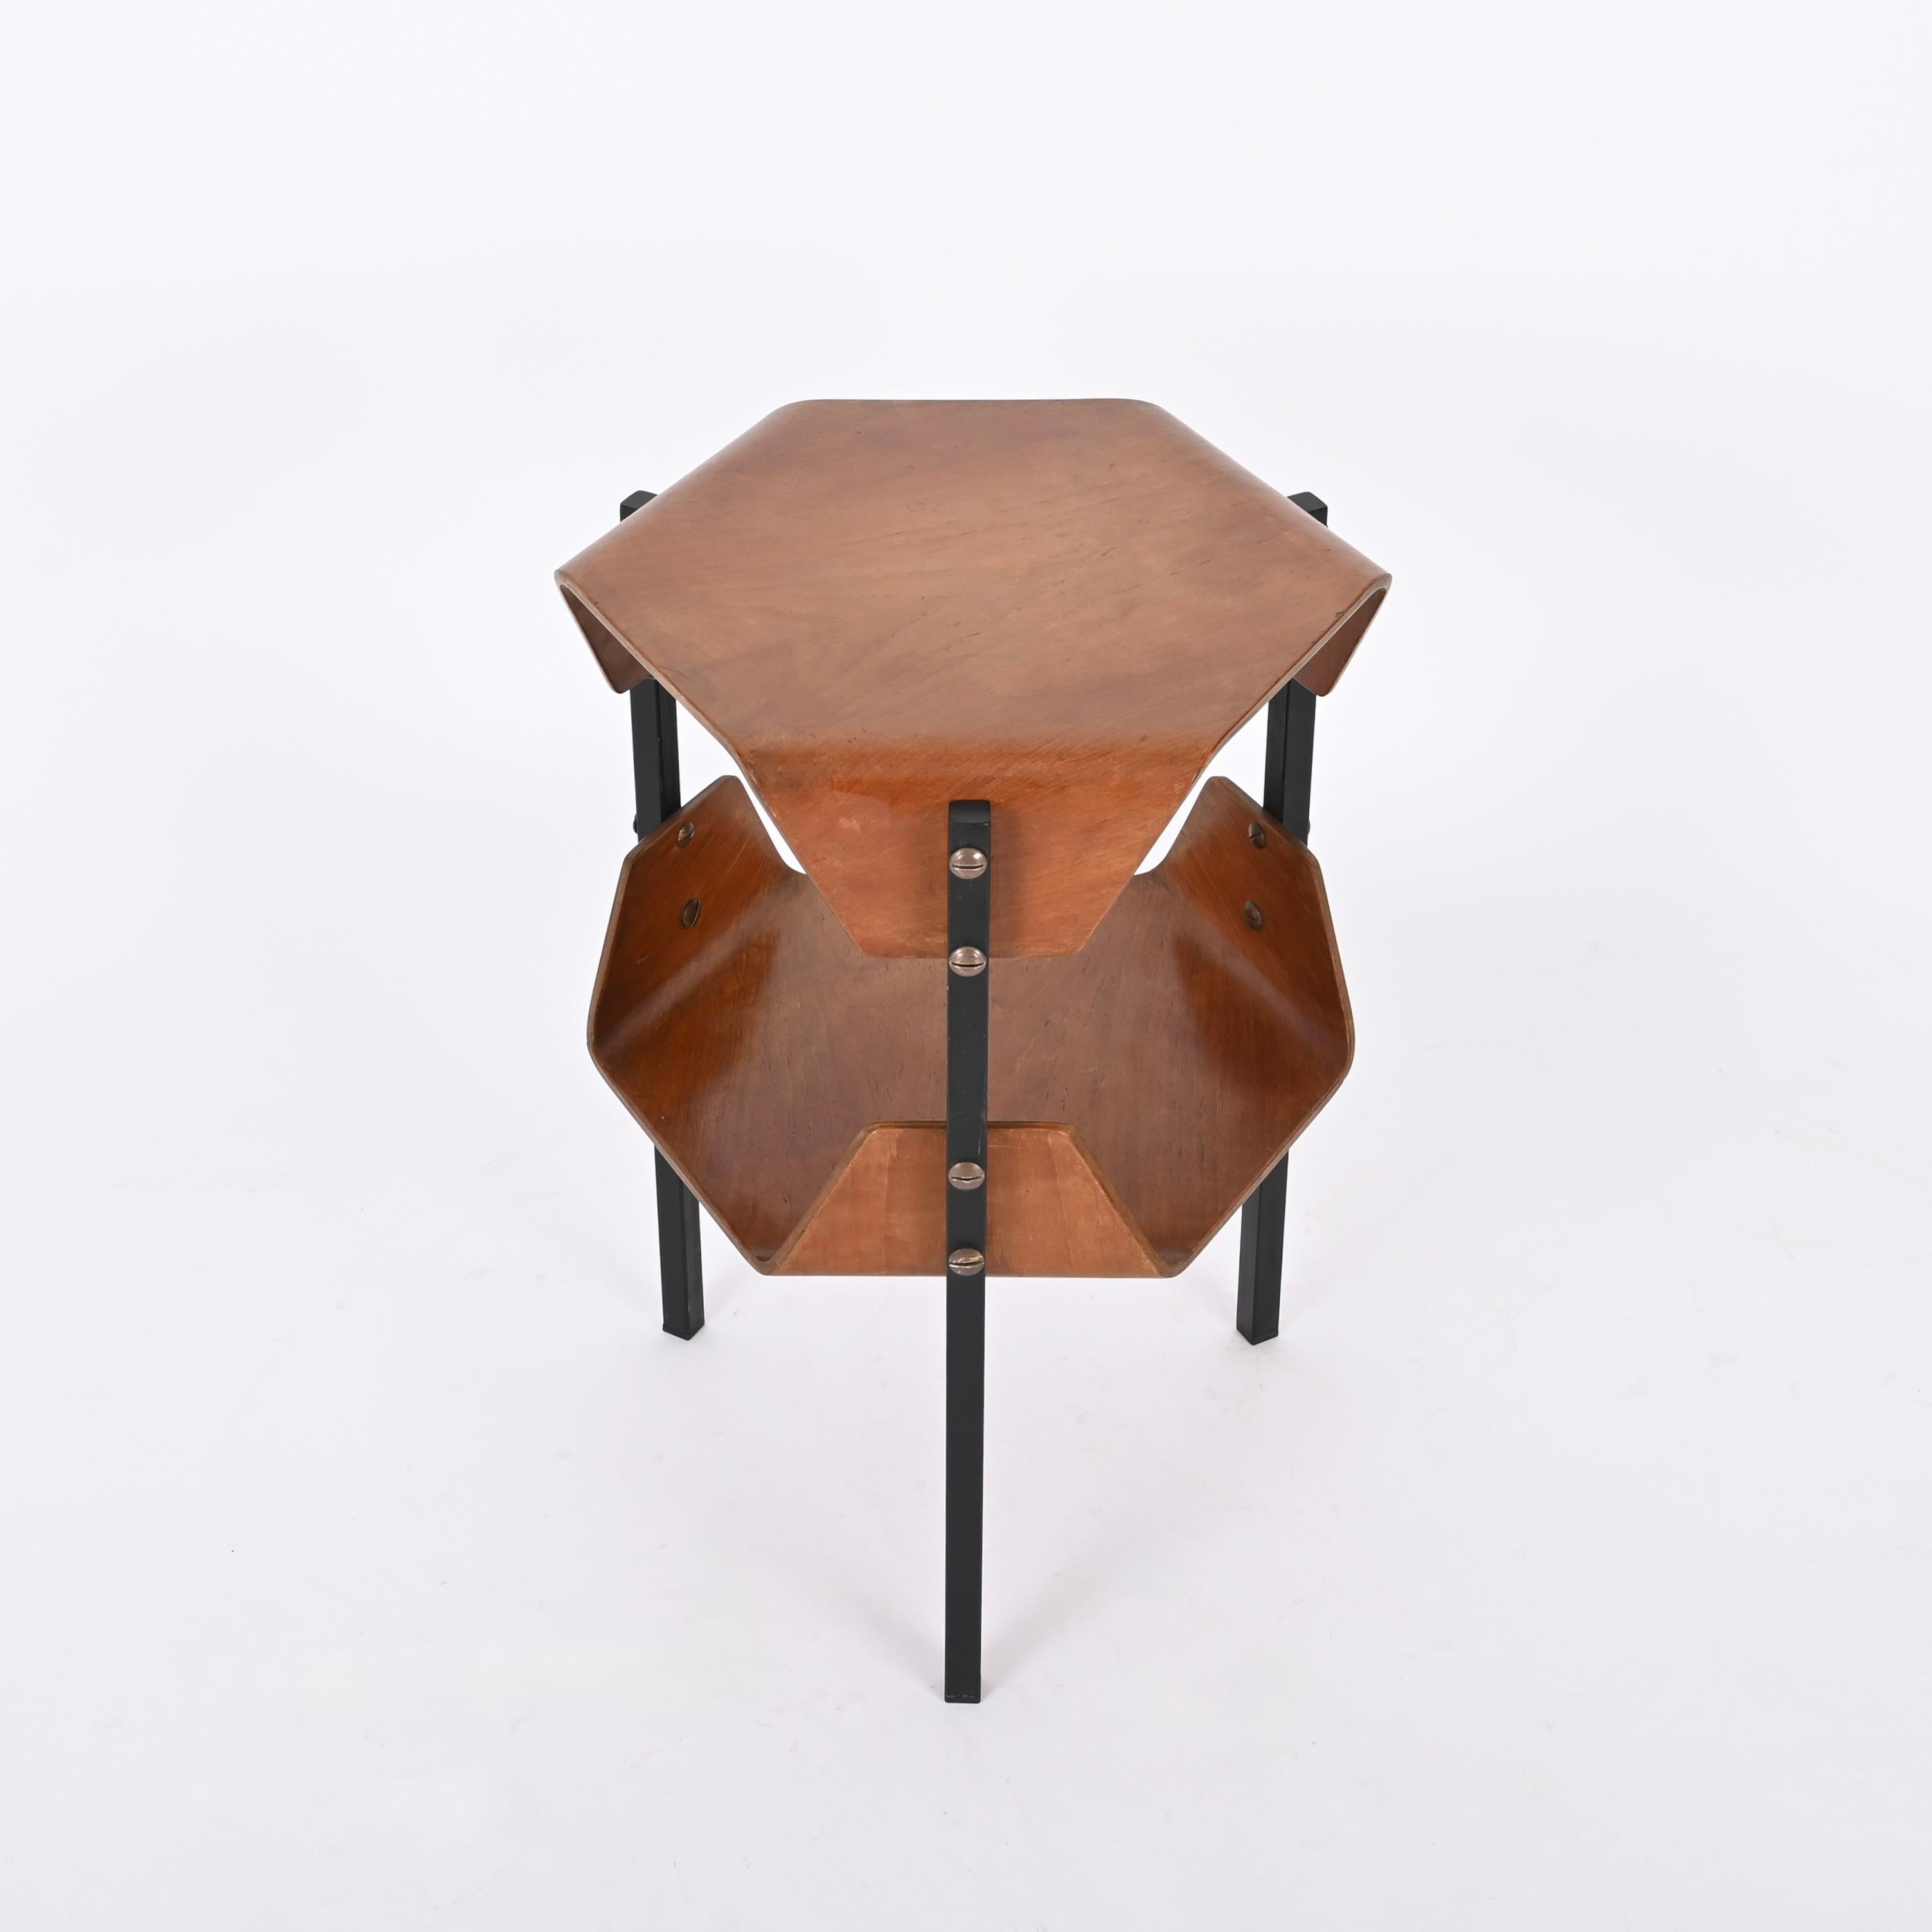 Enameled Midcentury Side Table by Campo e Graffi, Bent Walnut, Brass and Metal, 1950s